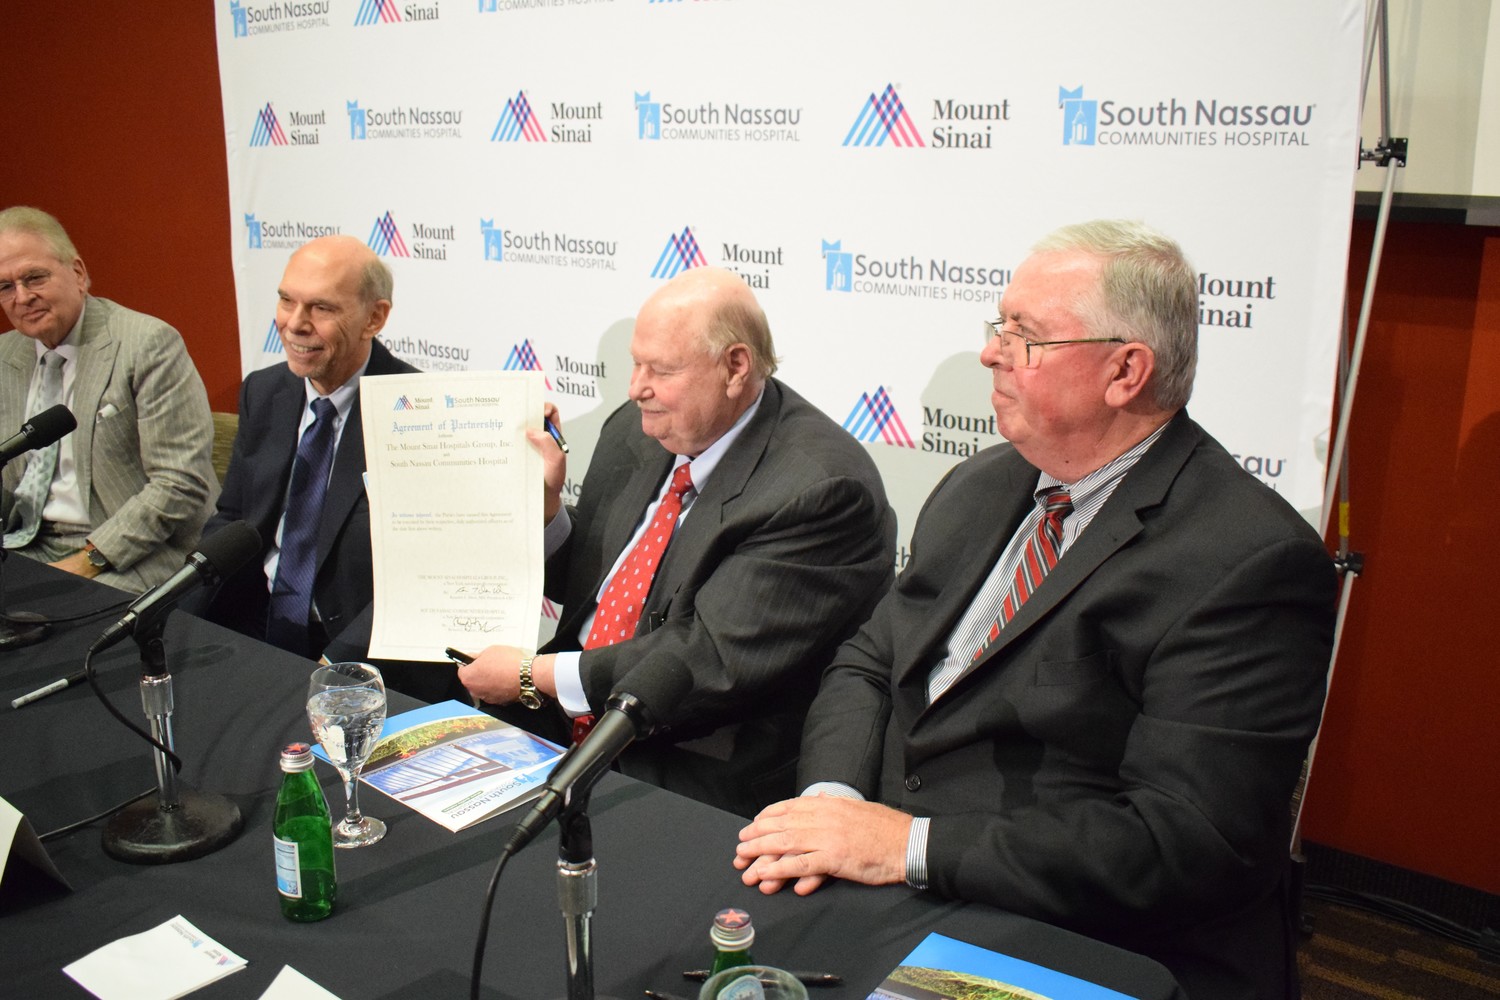 Representatives of South Nassau Communities Hospital and the Mount Sinai Health System announced their partnership Tuesday. Joseph Fennessy, the chairman of SNCH’s board of directors, held the ceremonial agreement that was signed. WIth him, from left, were Mount Sinai President Dr. Arthur Klein, Mount Sinai CEO Dr. Kenneth Davis and South Nassau President and CEO Richard Murphy.